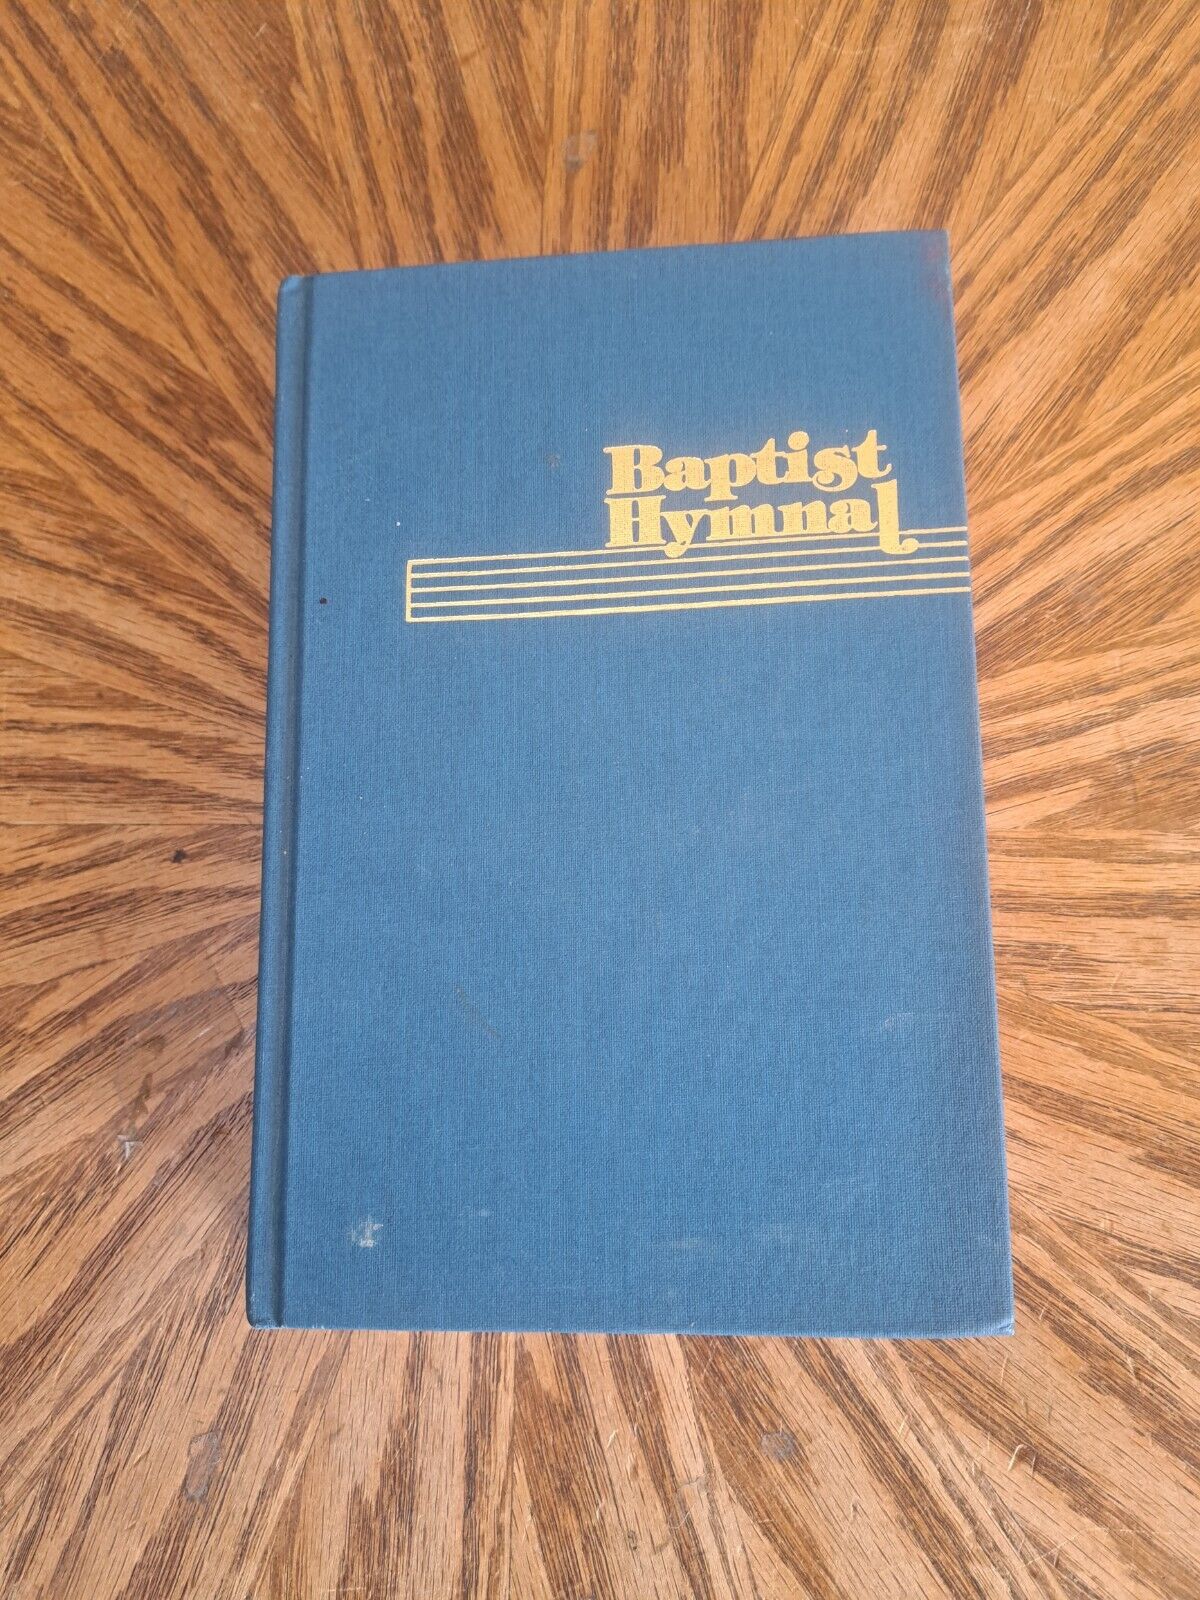 BAPTIST HYMNAL 1975 EDITION CONVENTION PRESS HARDCOVER